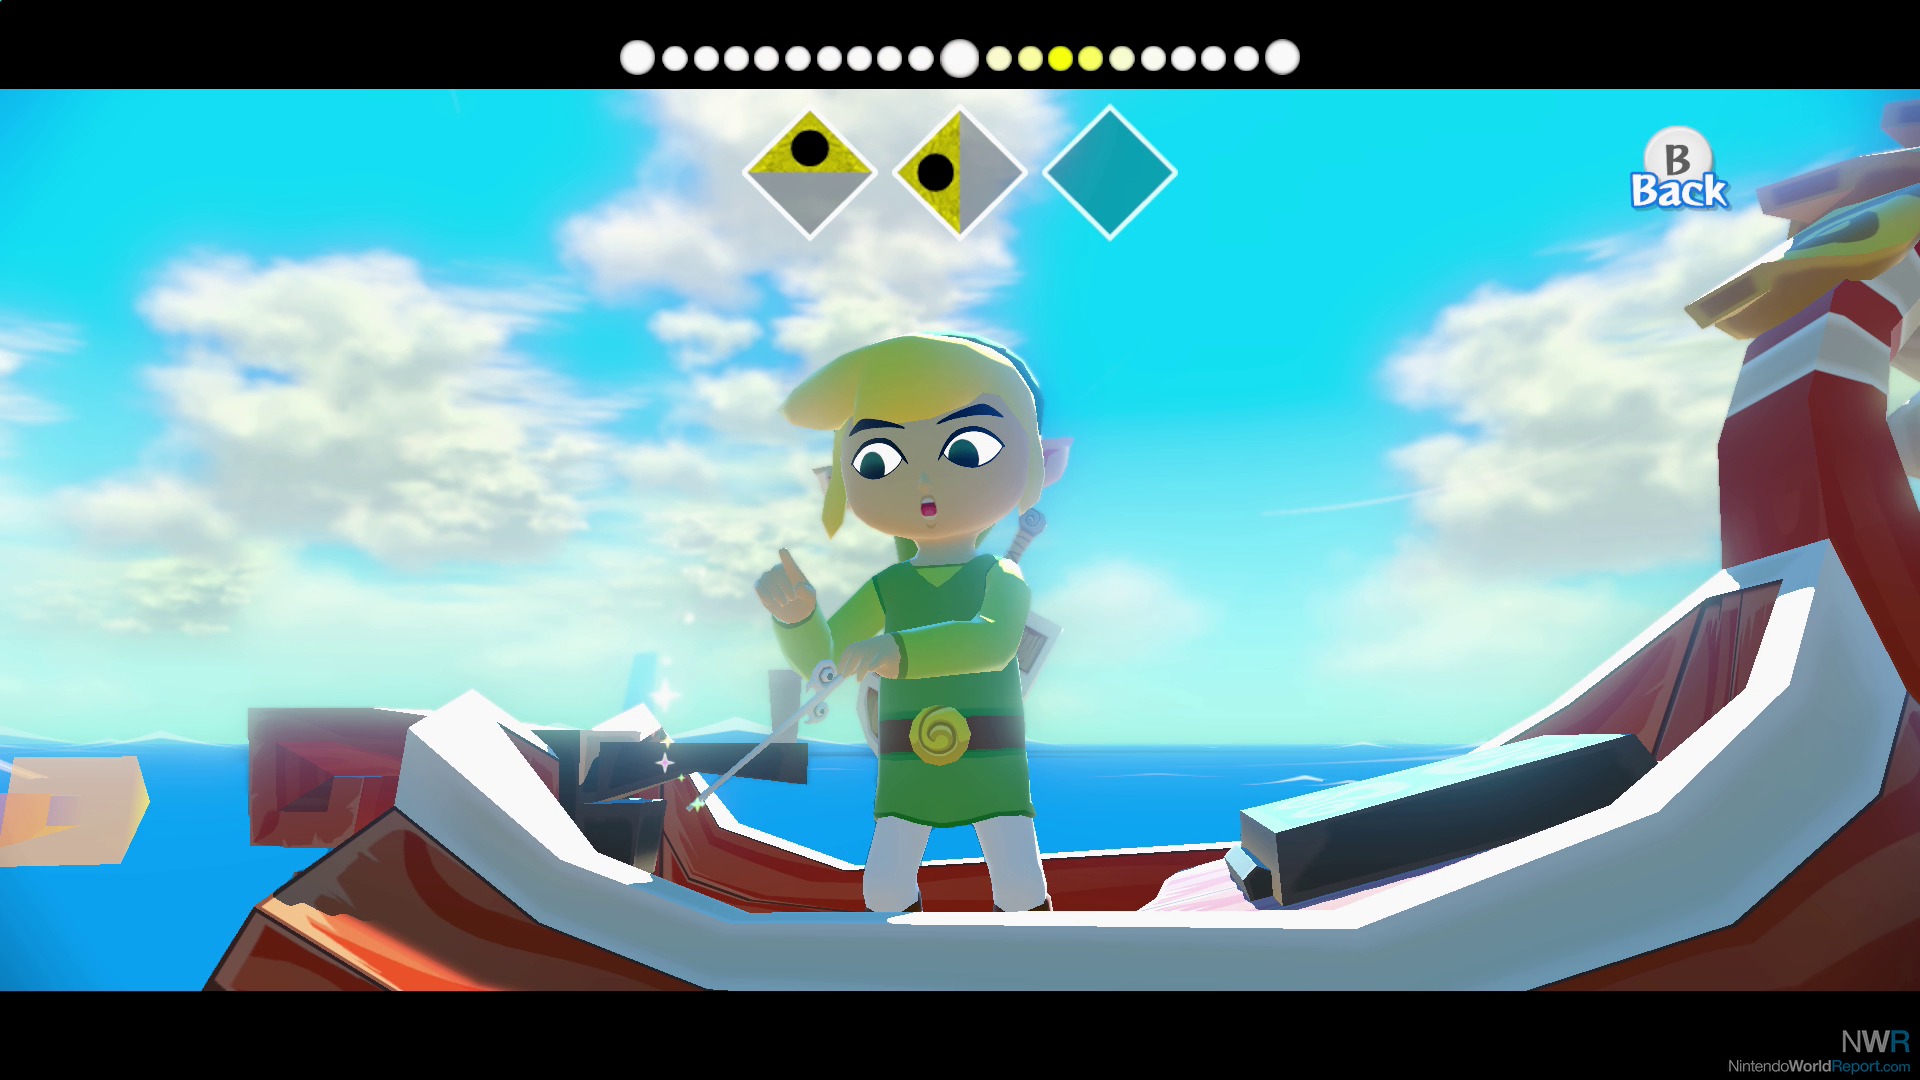 Wind Waker HD Download Size and Wii U Pro Controller Support Revealed -  News - Nintendo World Report